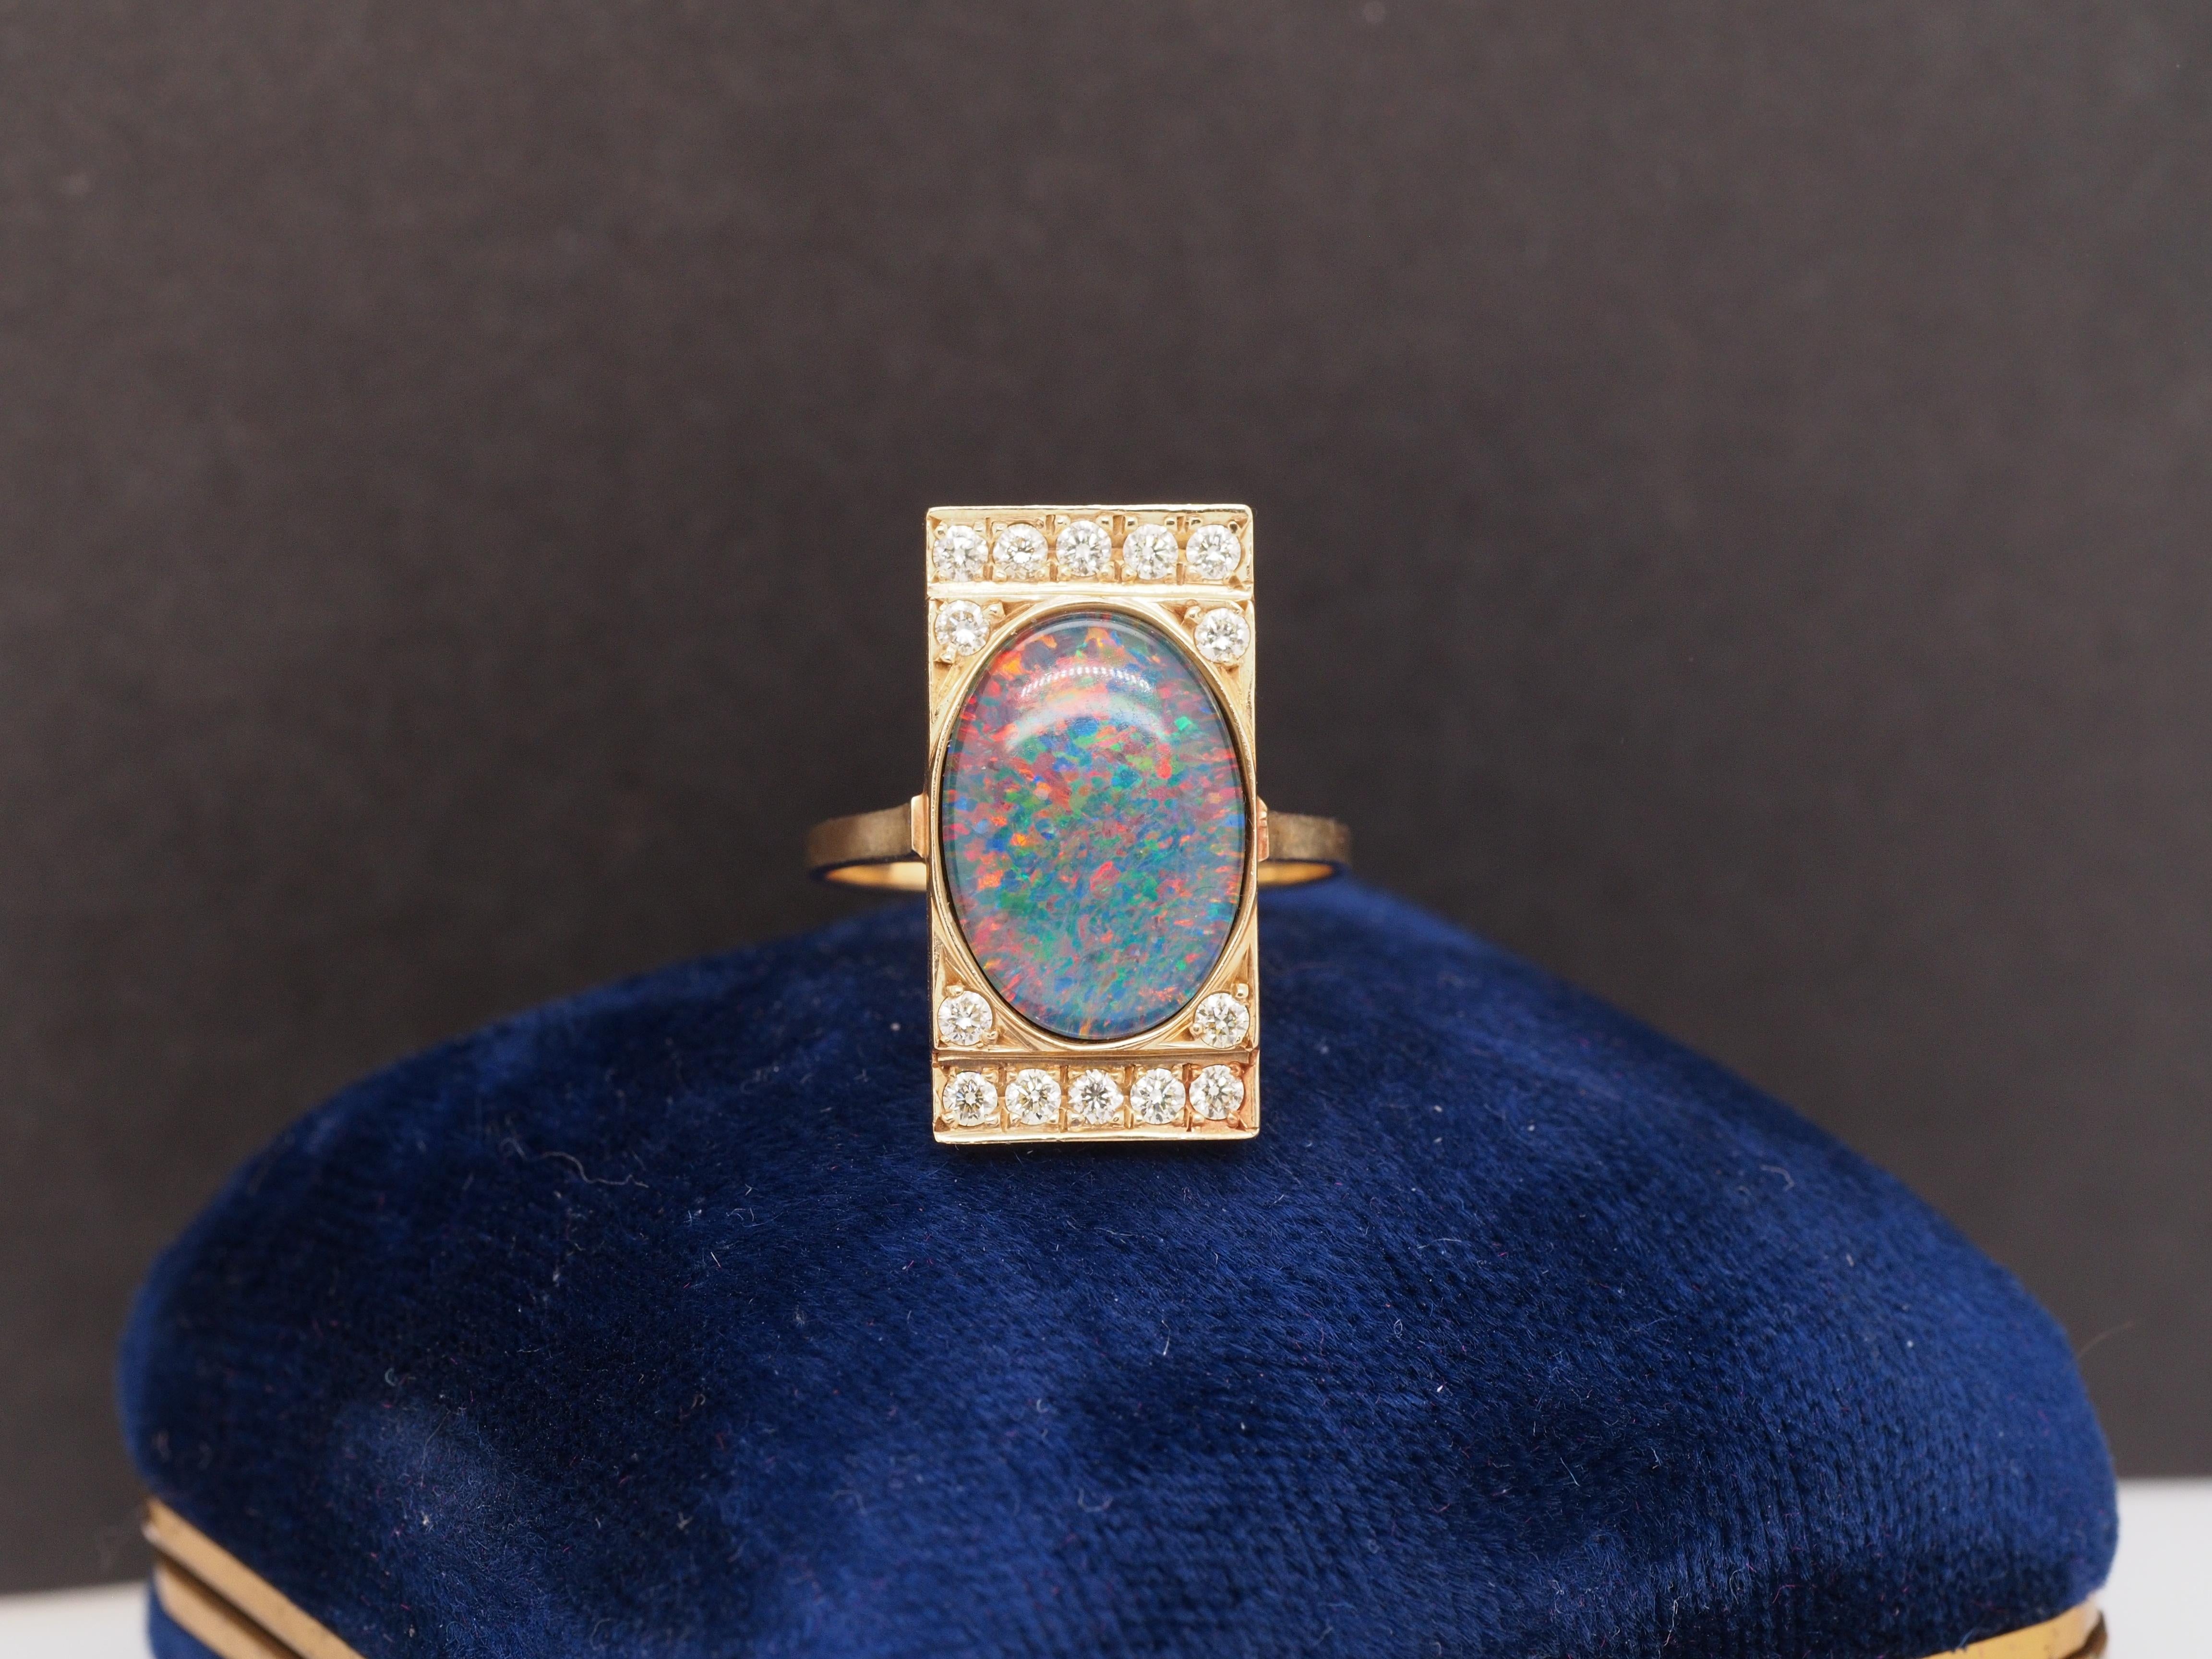 Year: 2000s
Item Details:
Ring Size: 7
Metal Type: 14K Yellow Gold [Hallmarked, and Tested]
Weight: 4.4 grams
Details:
Center Opal: Doublet, Color Play of Red, Green, Blue
Side Diamonds: .35ct, total weight. Natural Diamonds, Light Yellow Color, VS